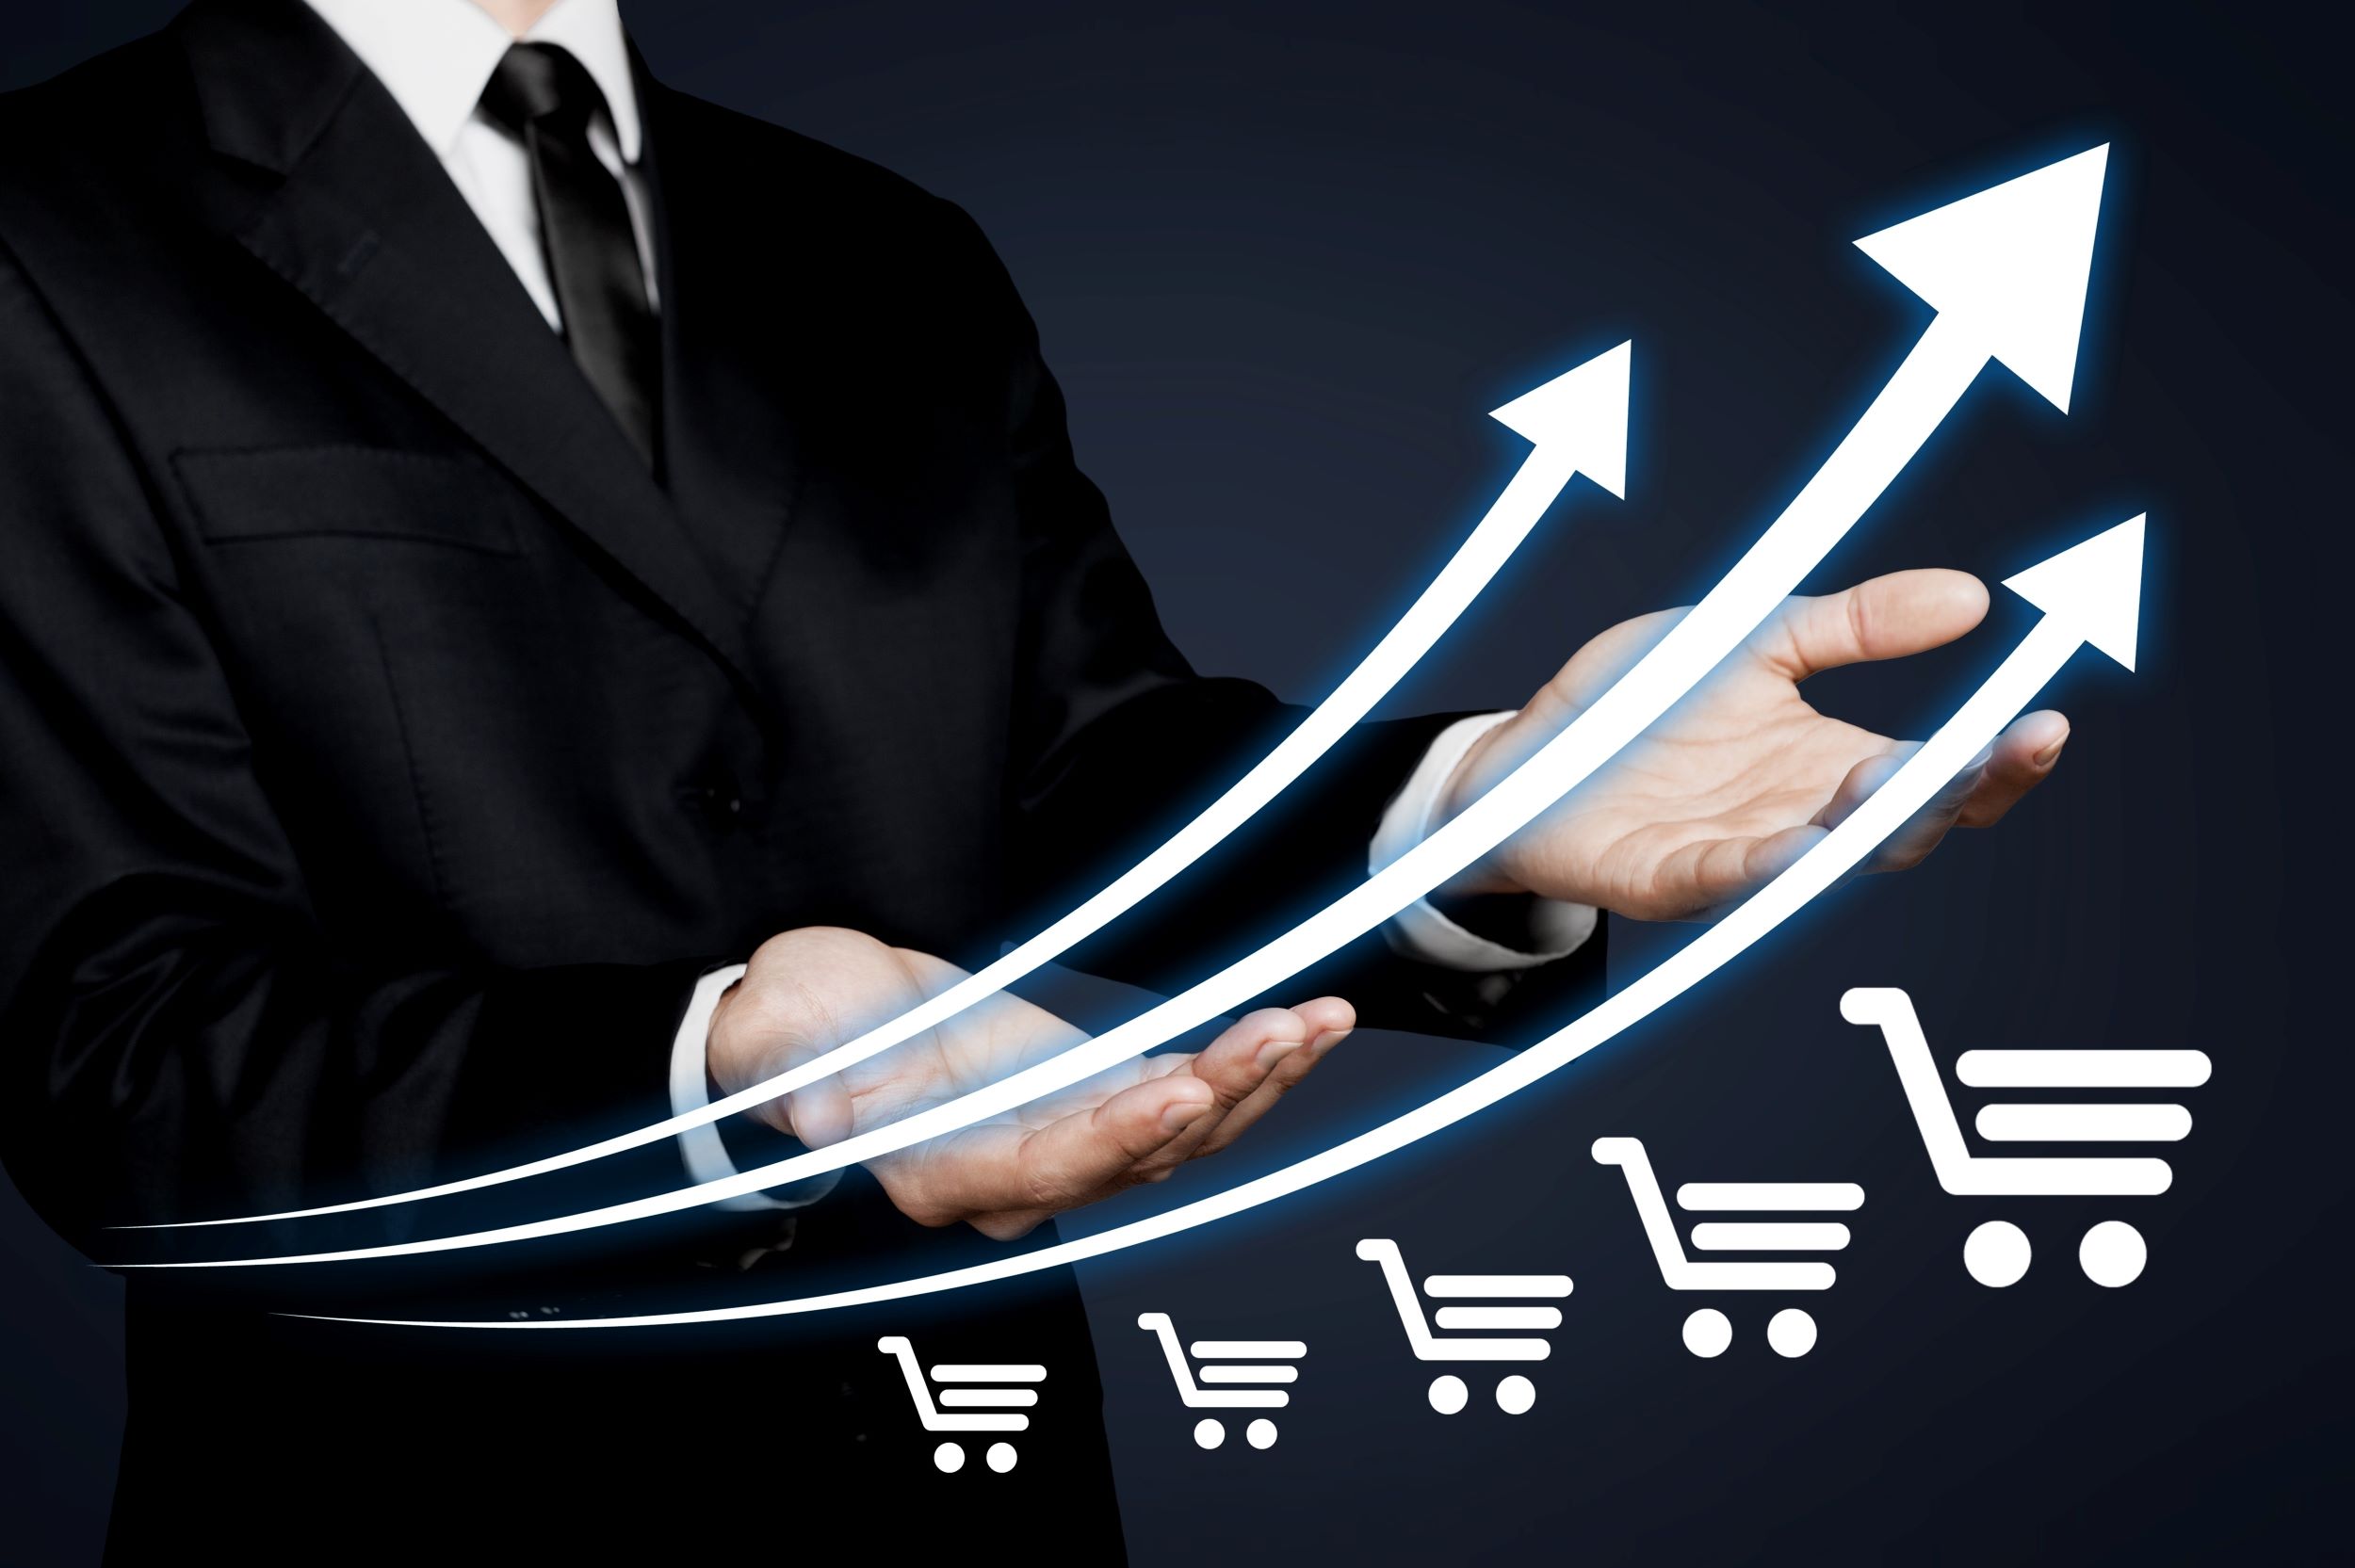 Businessman in suit showing graph that depicts online sales growth